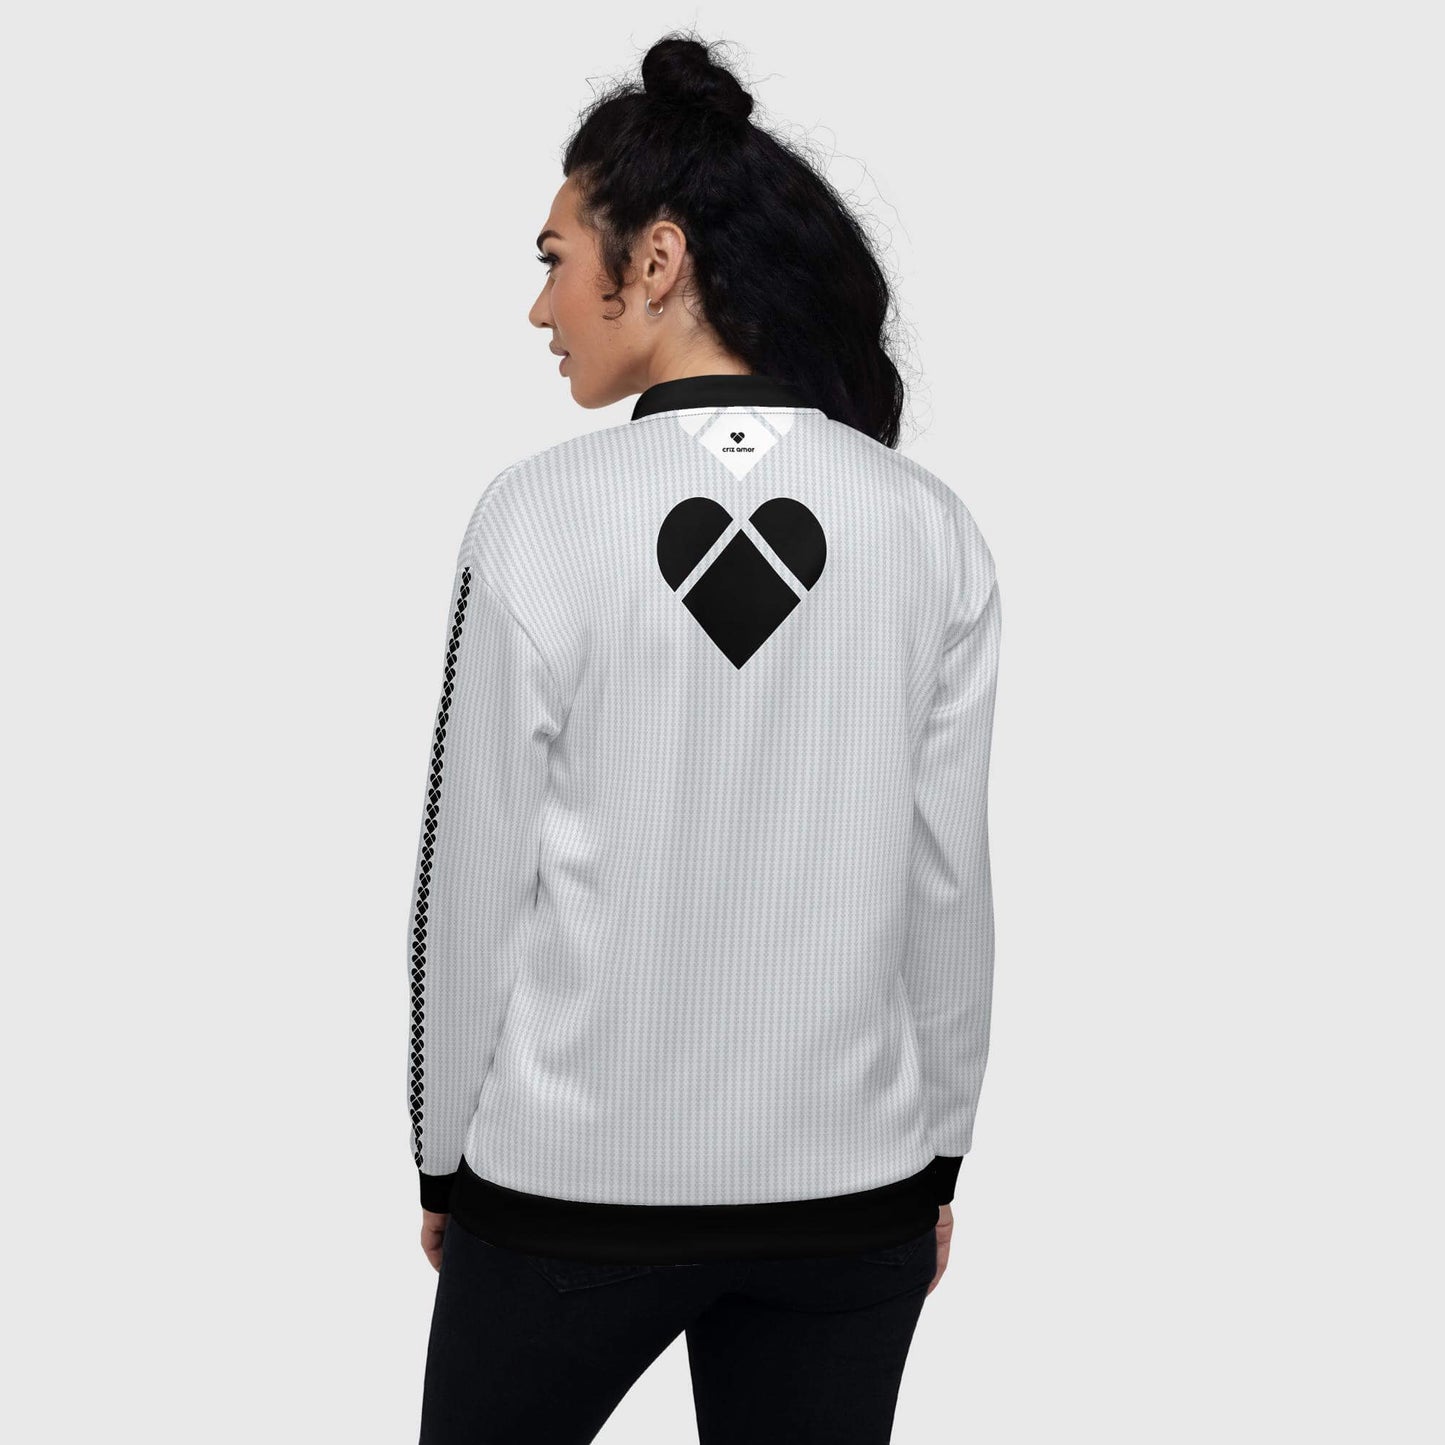 A light gray bomber jacket with a unique 'Dualshade lovogram' pattern and black heart logo by CRiZ AMOR, female model back view